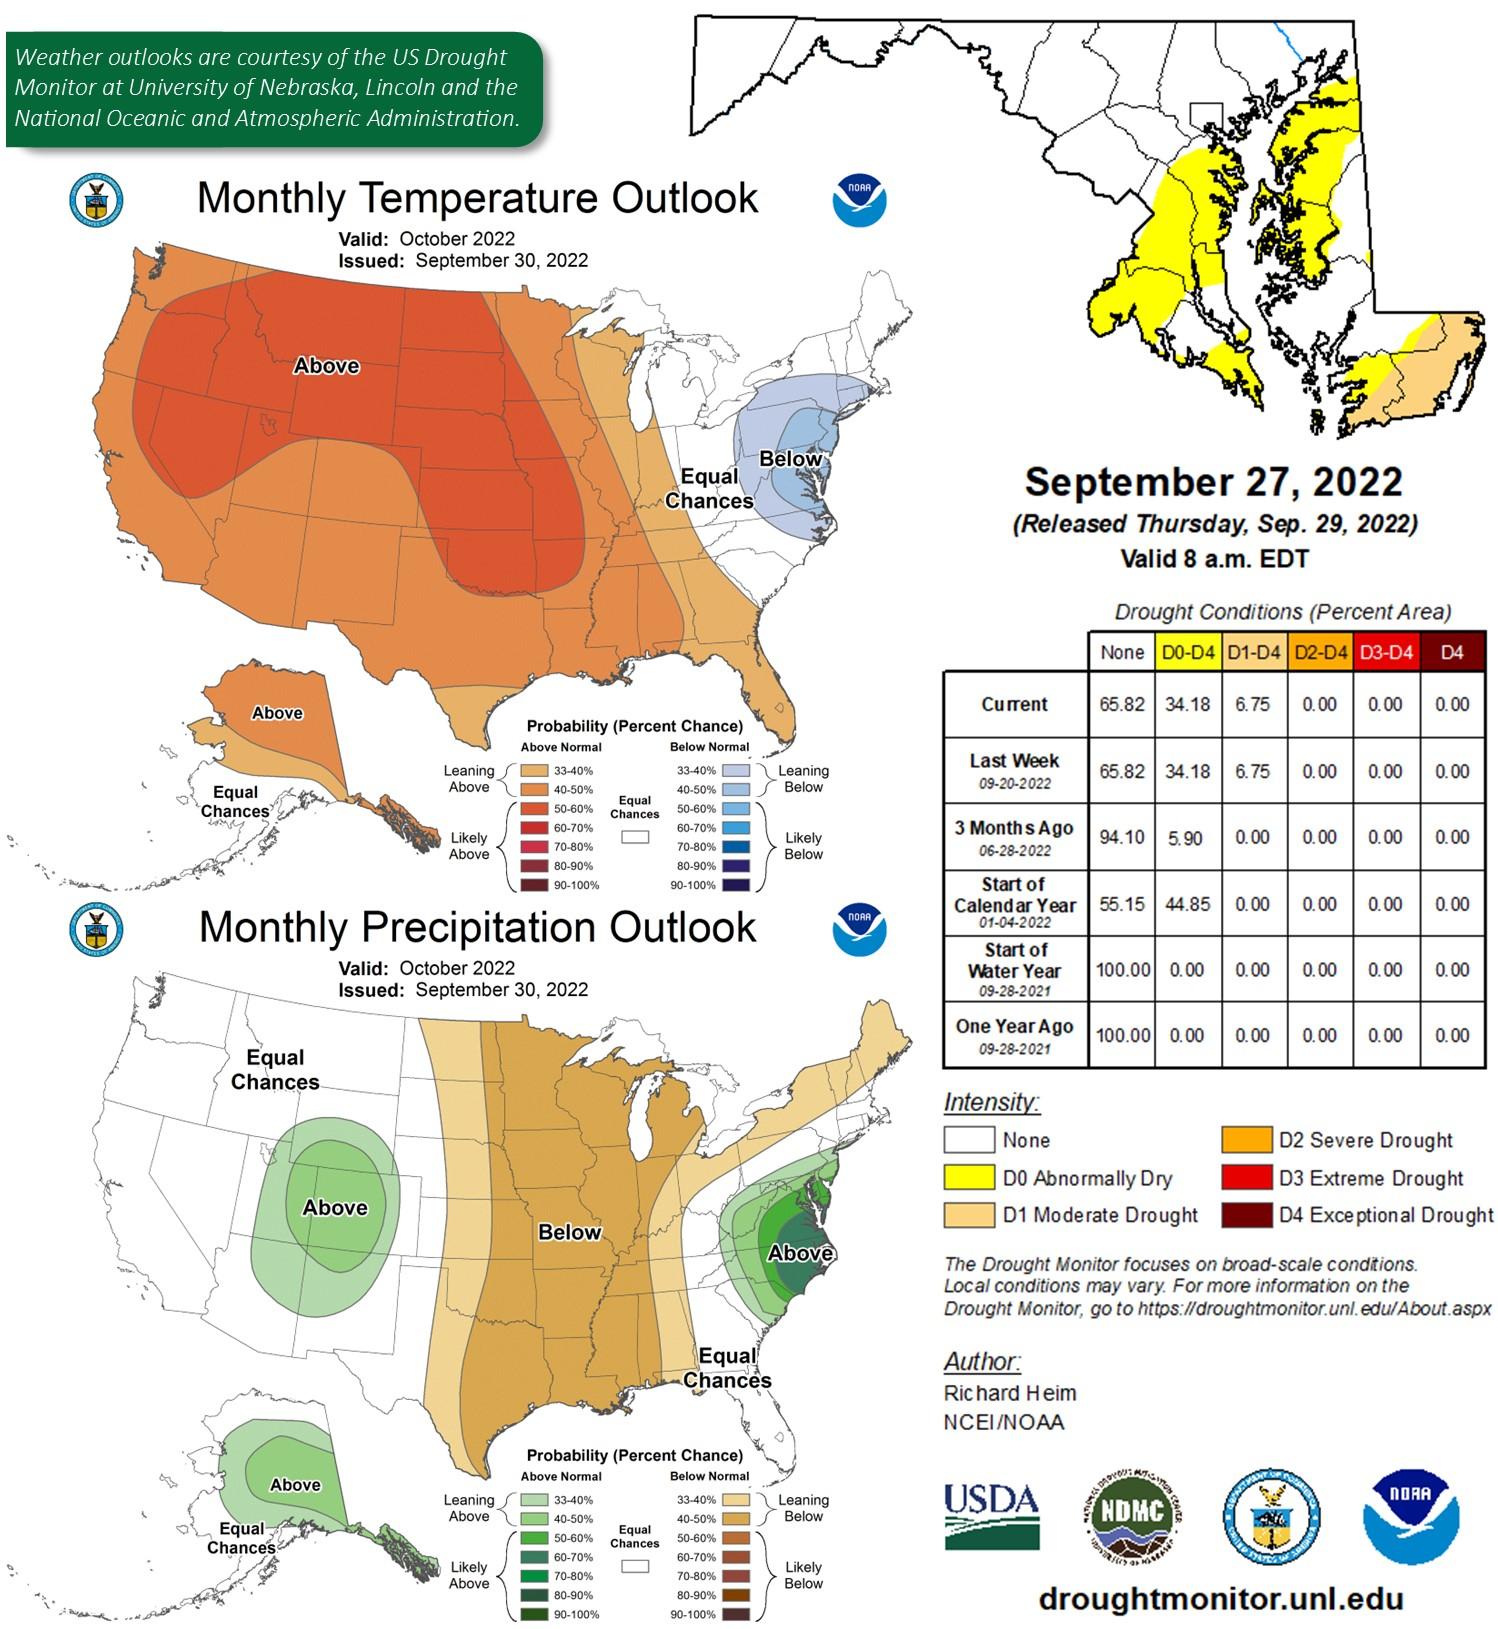 Weather outlook for the month of October.  The graphs contain temperature, drought conditions, precipitation outlooks